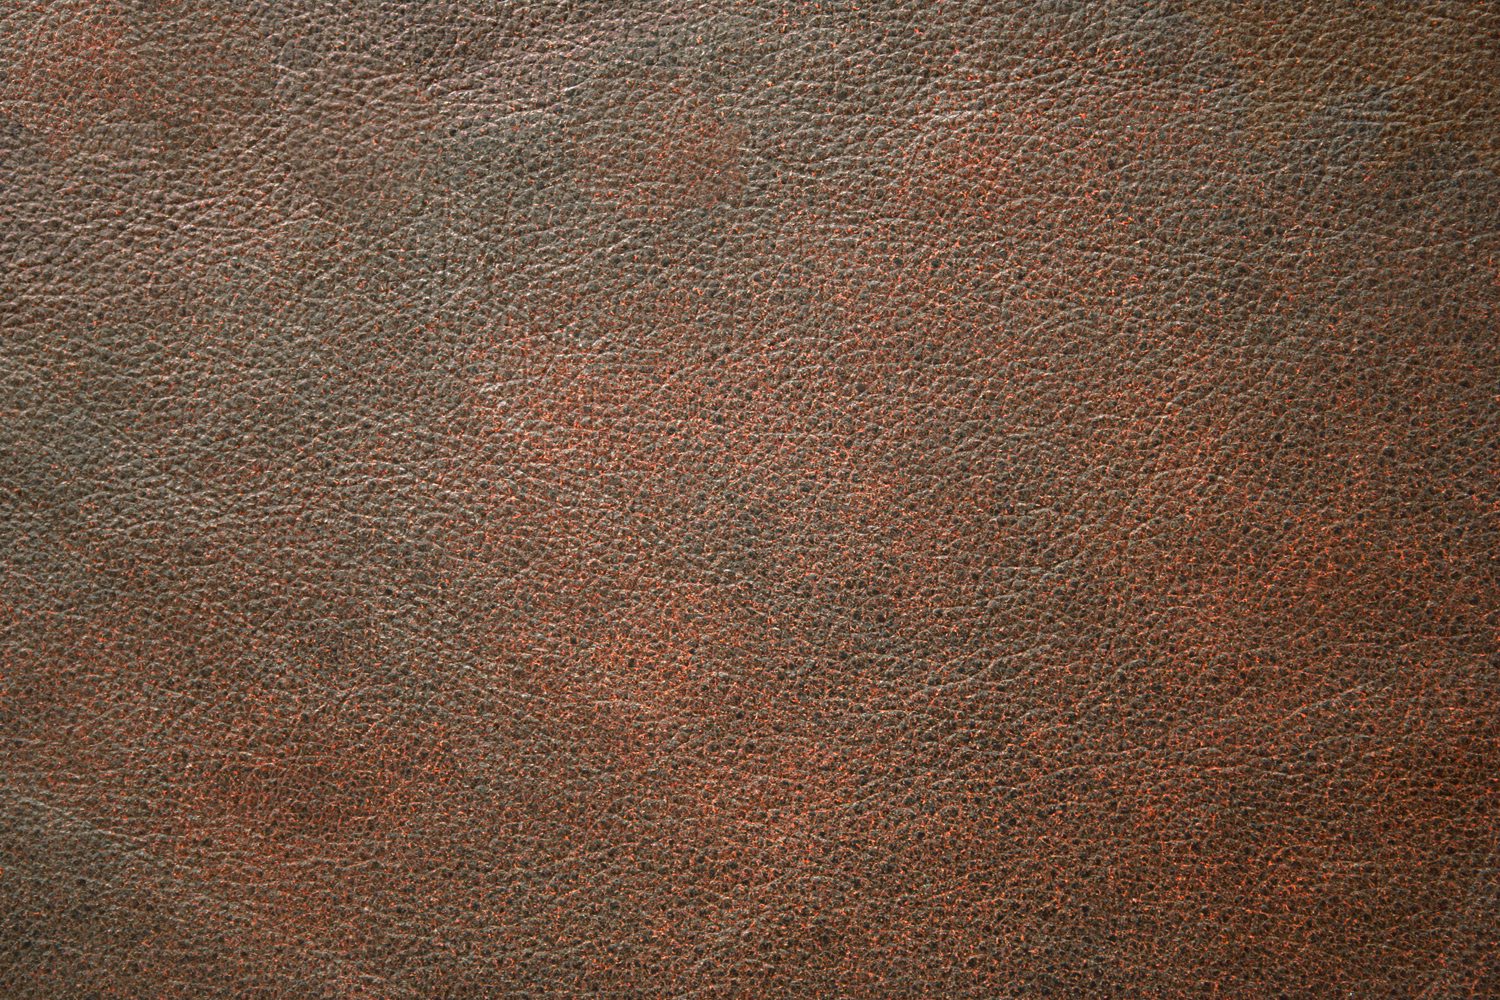 Seamless Leather Texture